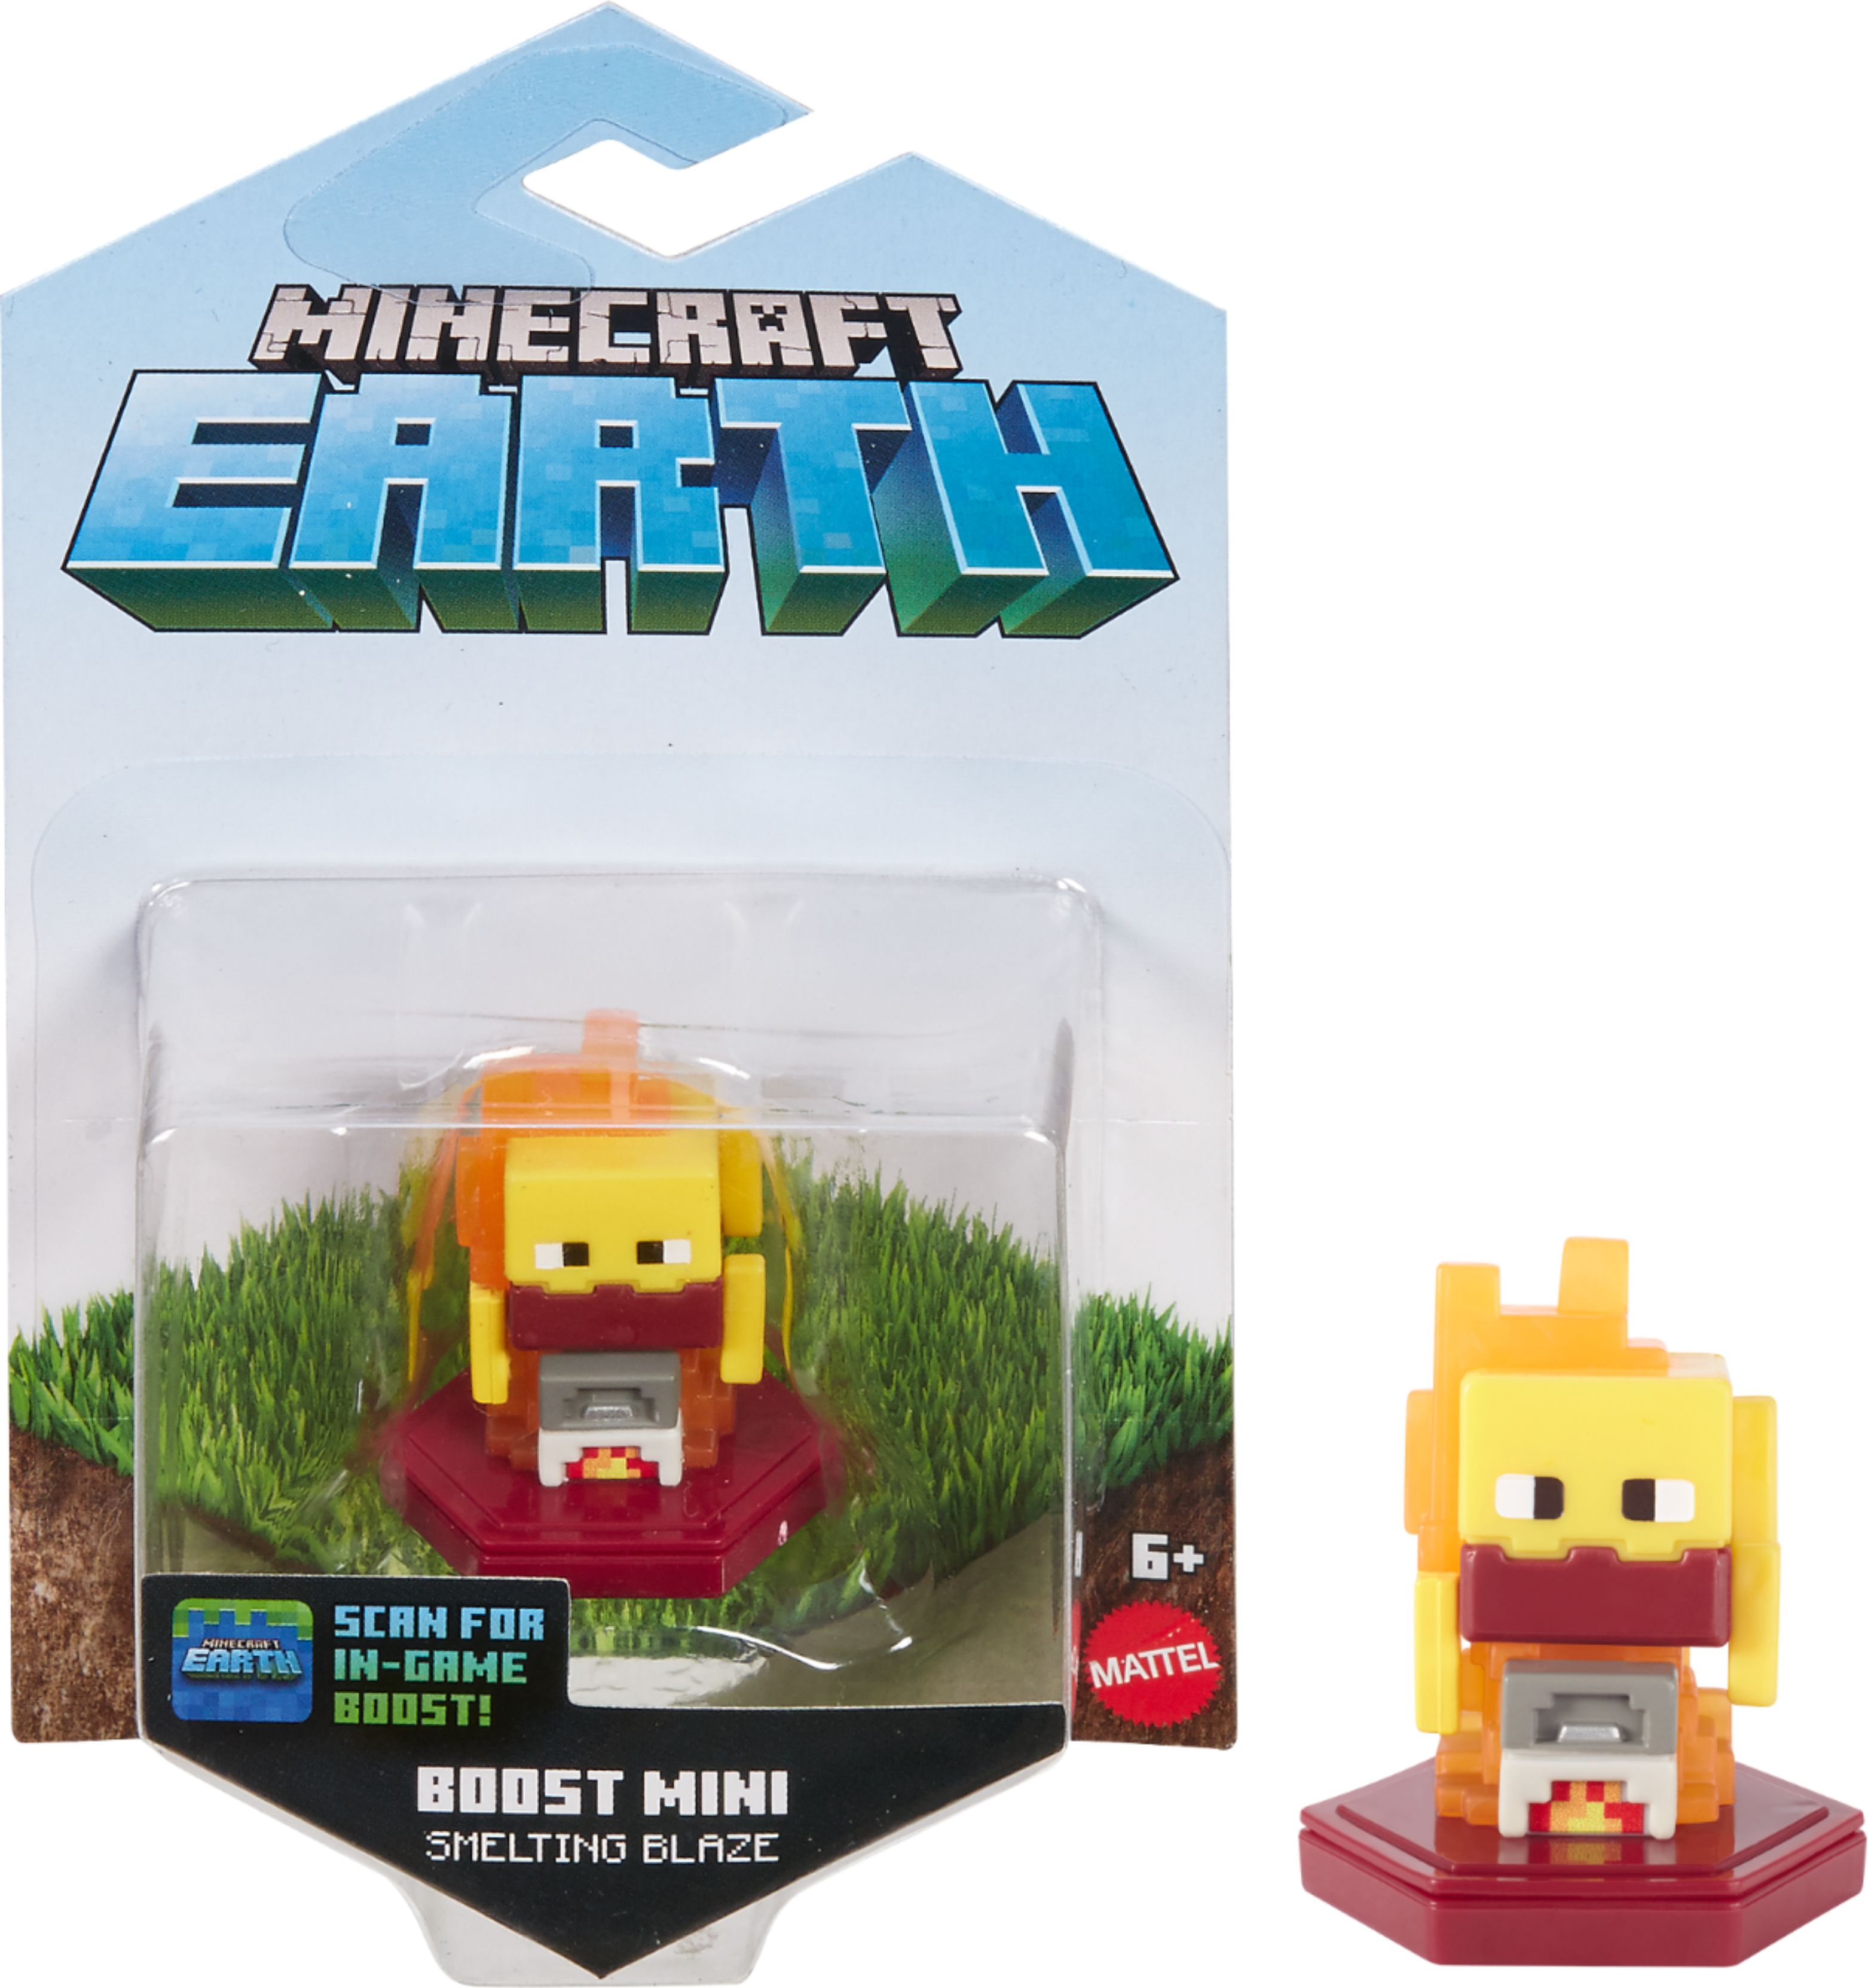 Details about   Mattel Authentic New in Box Minecraft Earth Boost Mini Figure Pick 1 Age 6+